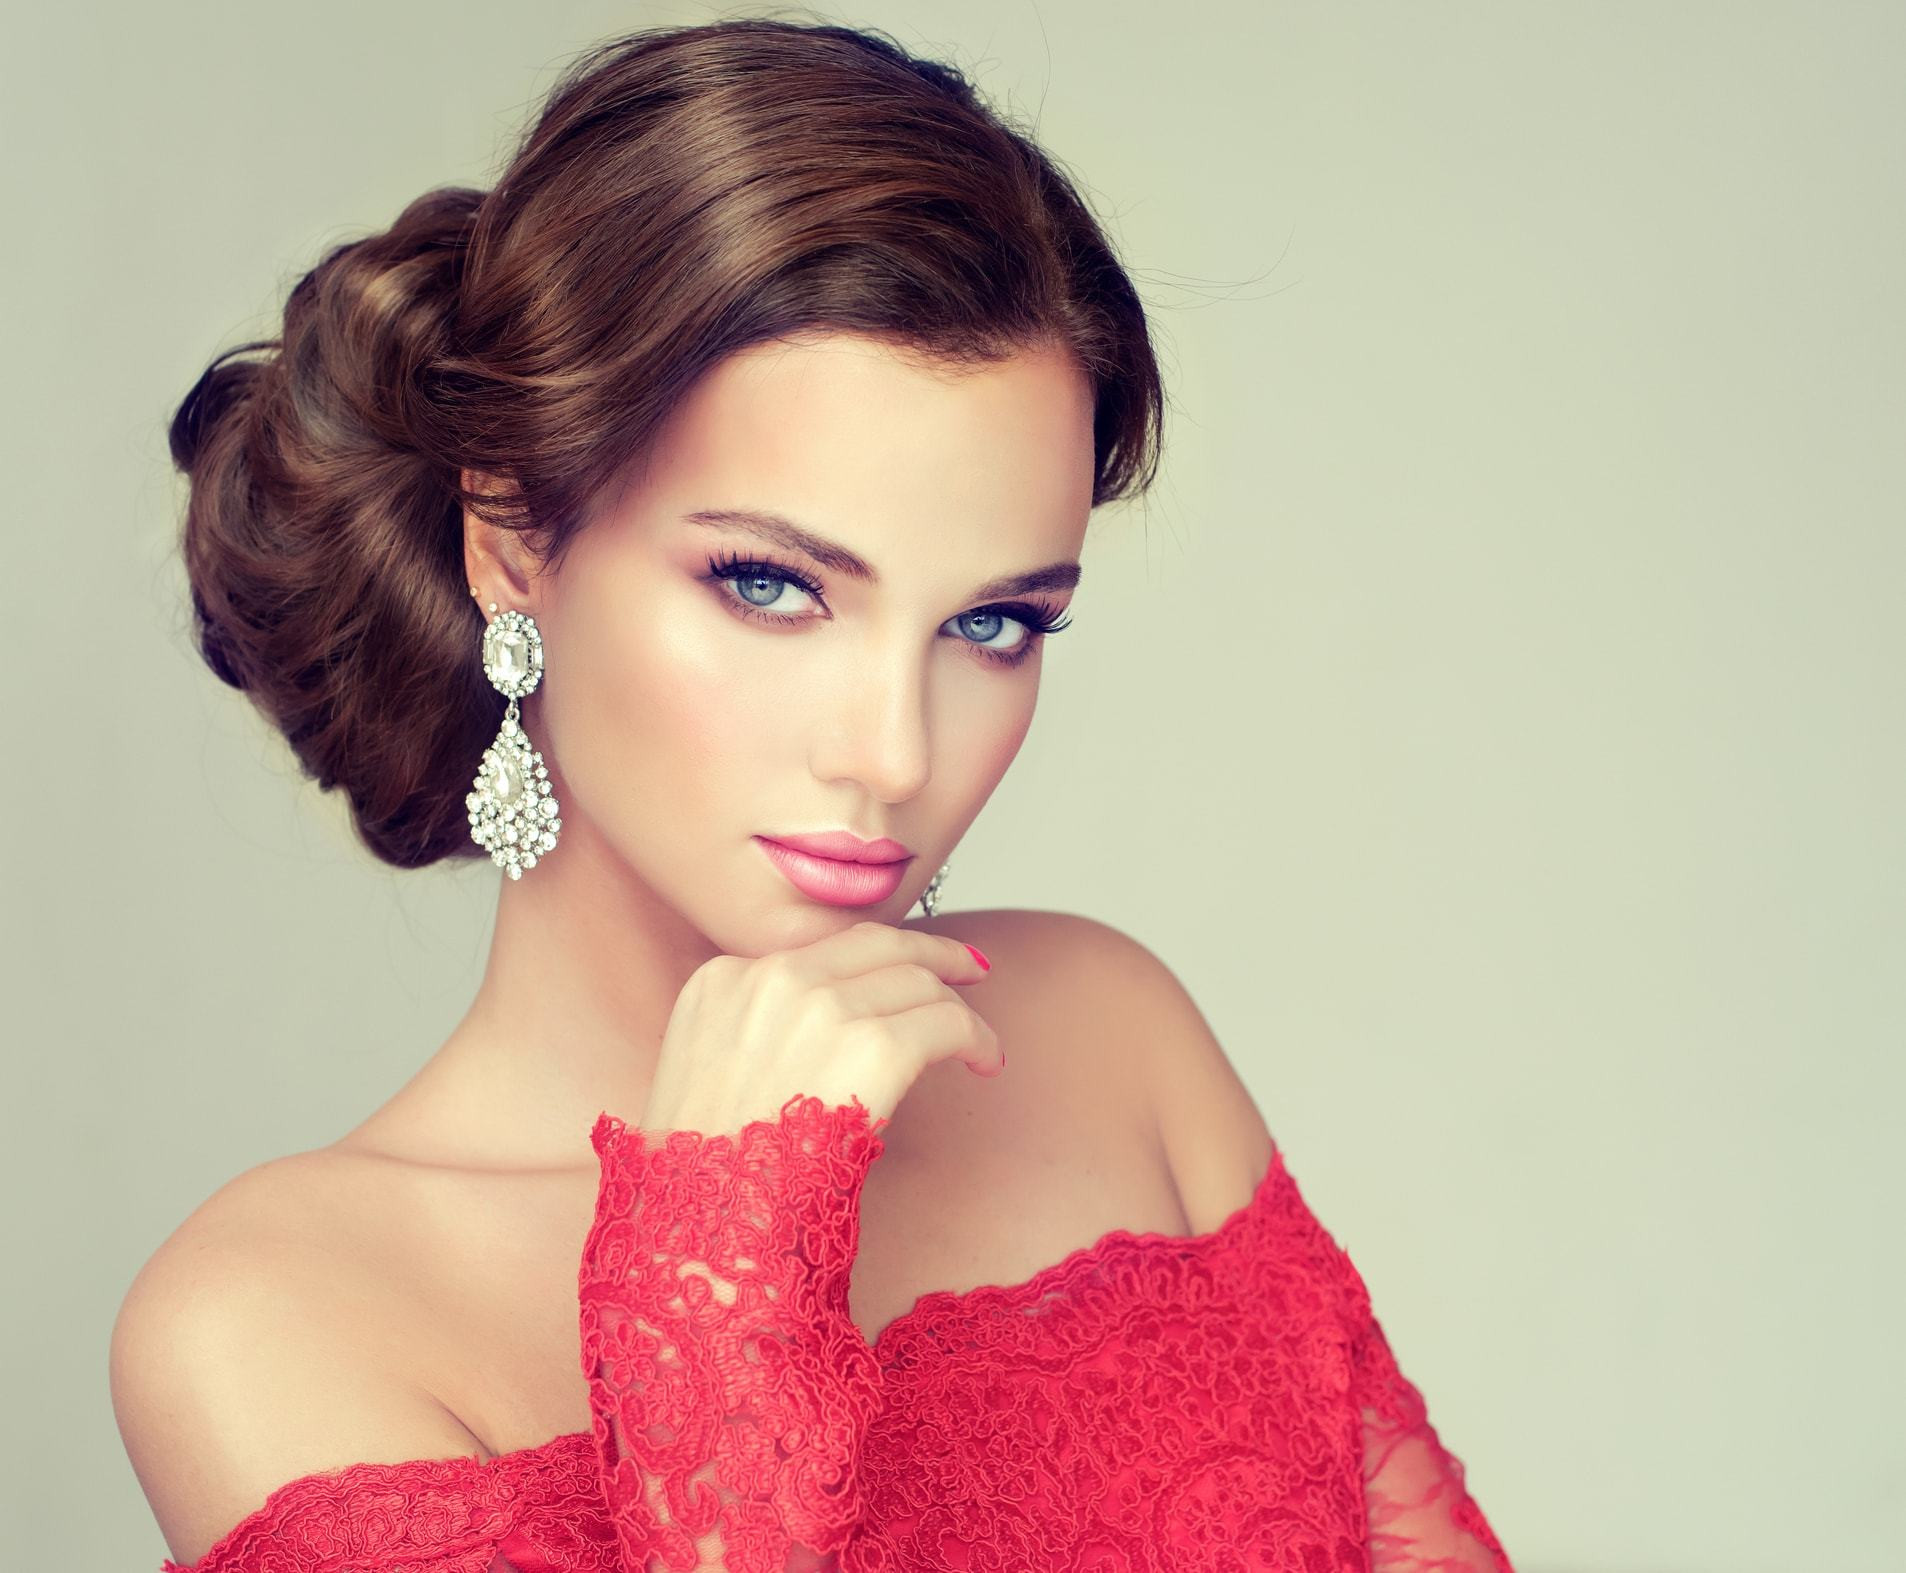 Pageant Hairstyles Updos
 The Top 10 Pageant Hairstyles and What They All Have in mon